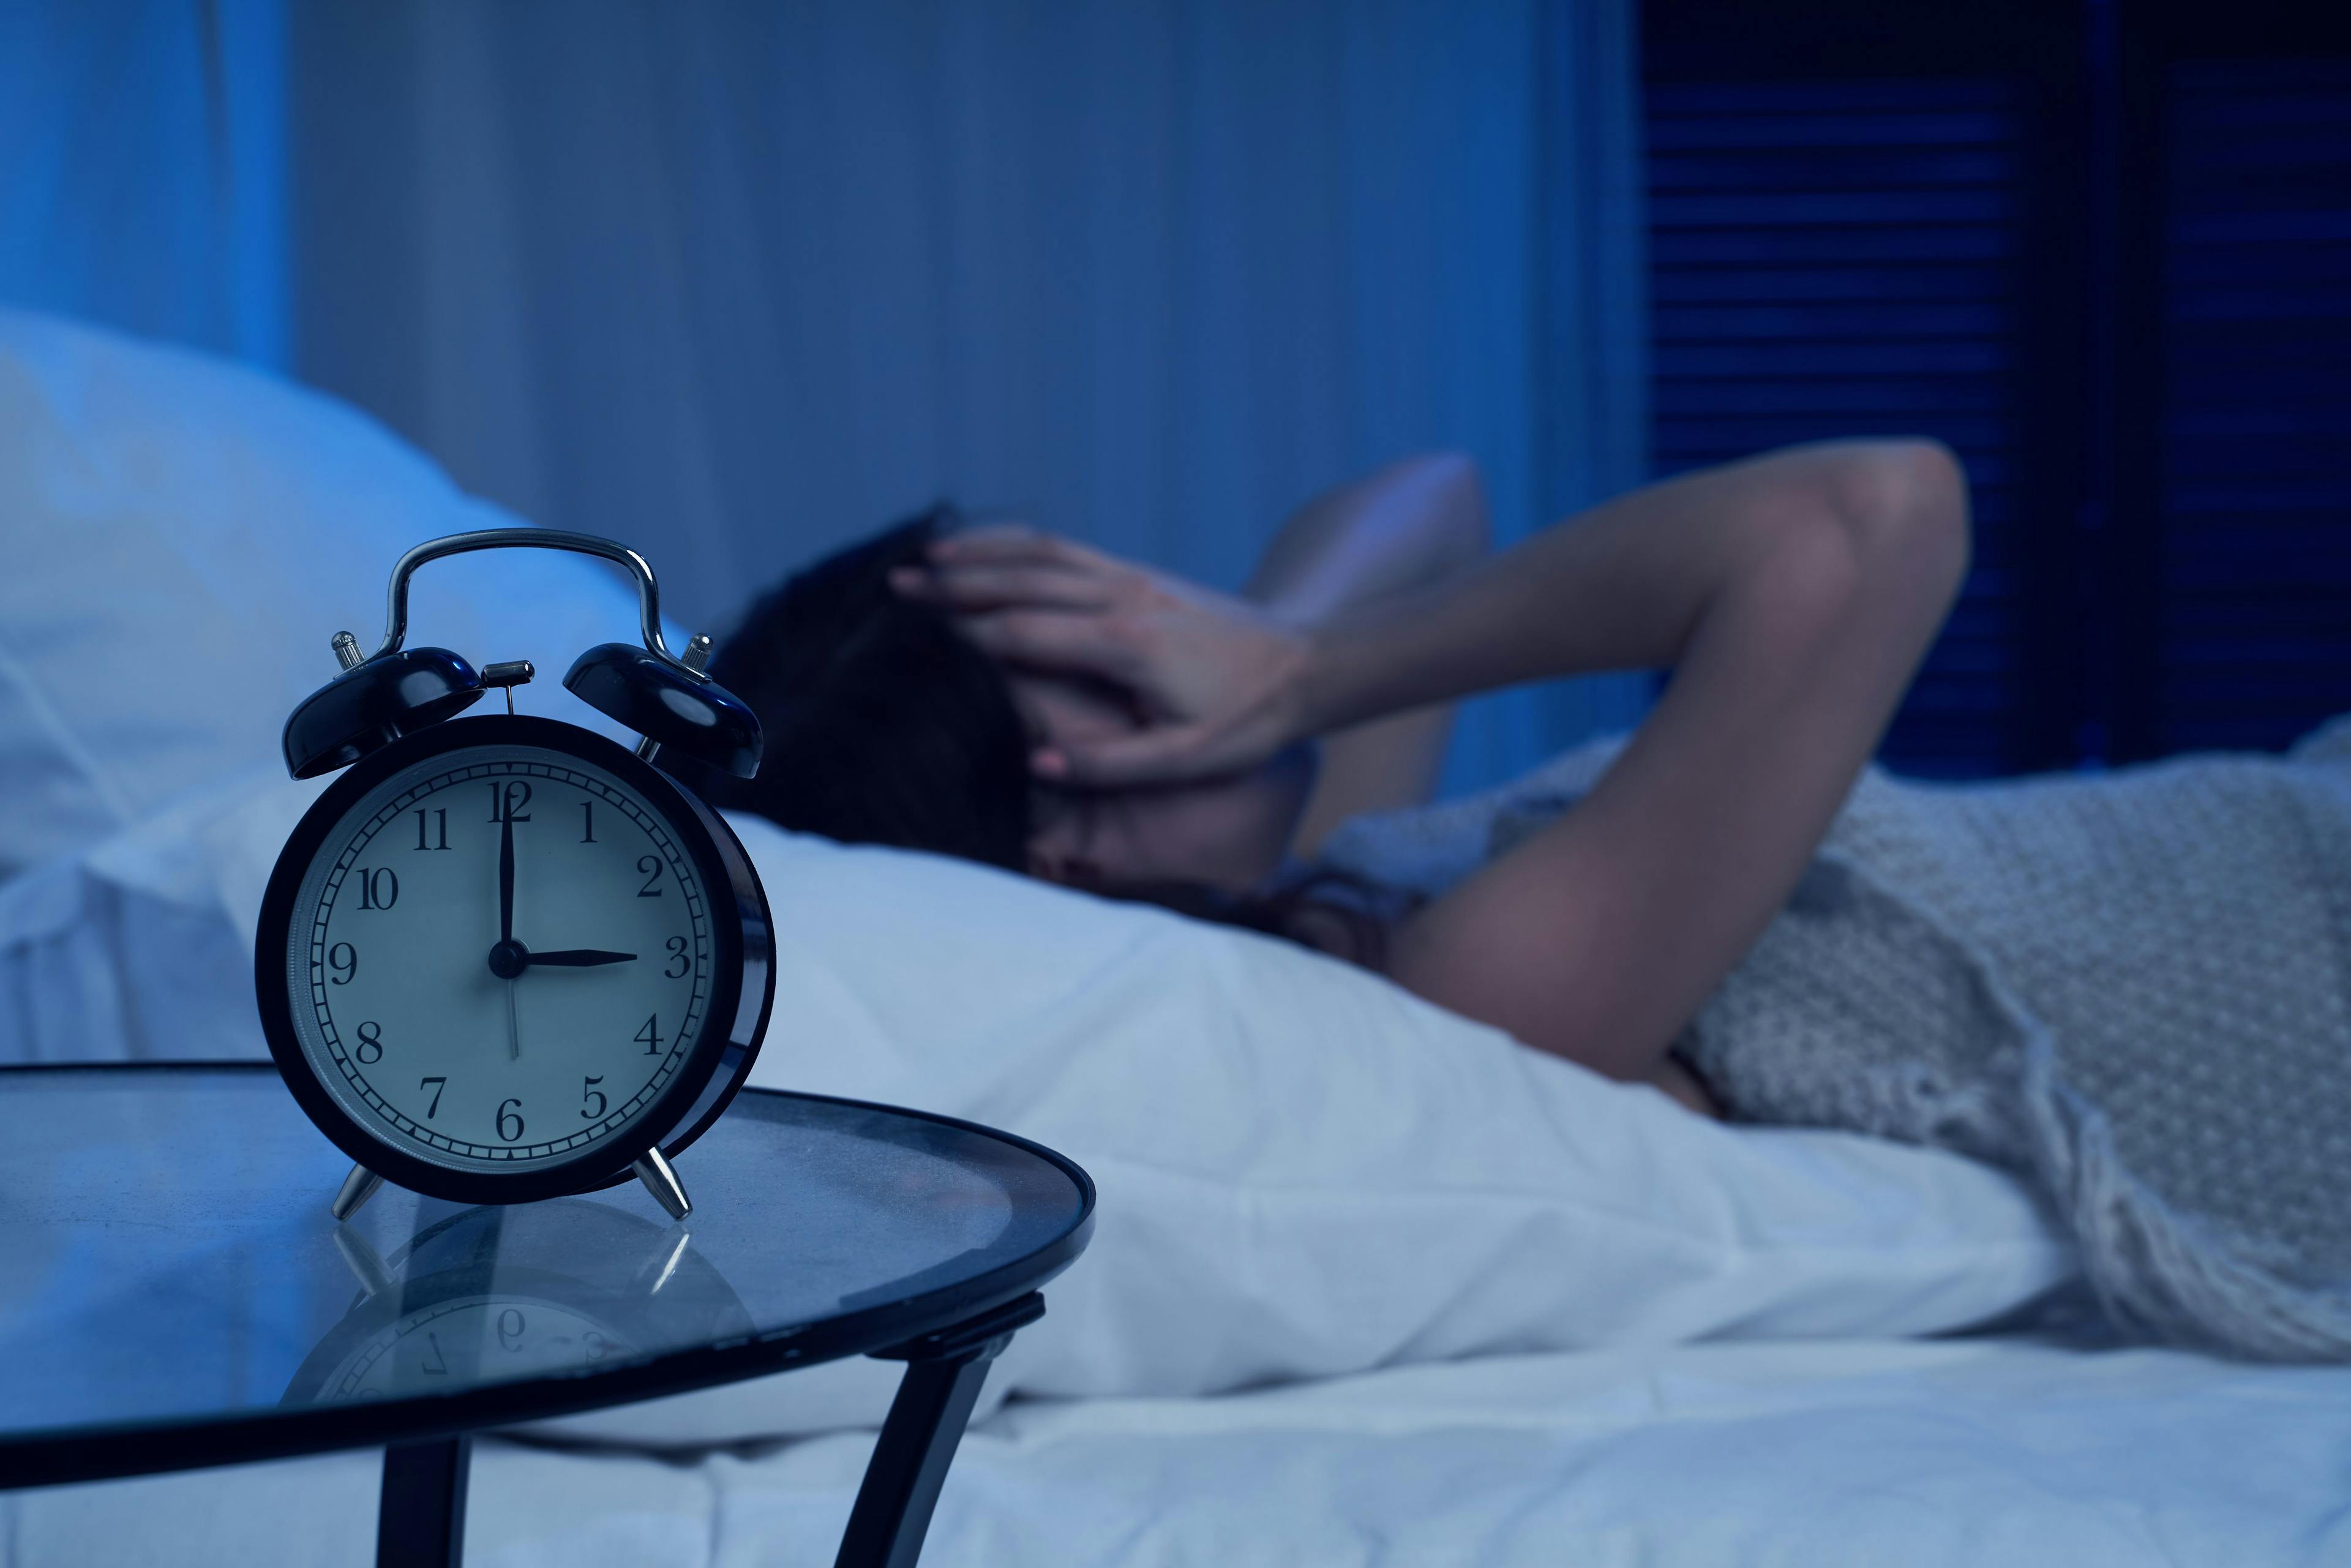 Image credit: Sergey | stock.adobe.com - Unhappy woman with insomnia lying on bed next to alarm clock at night